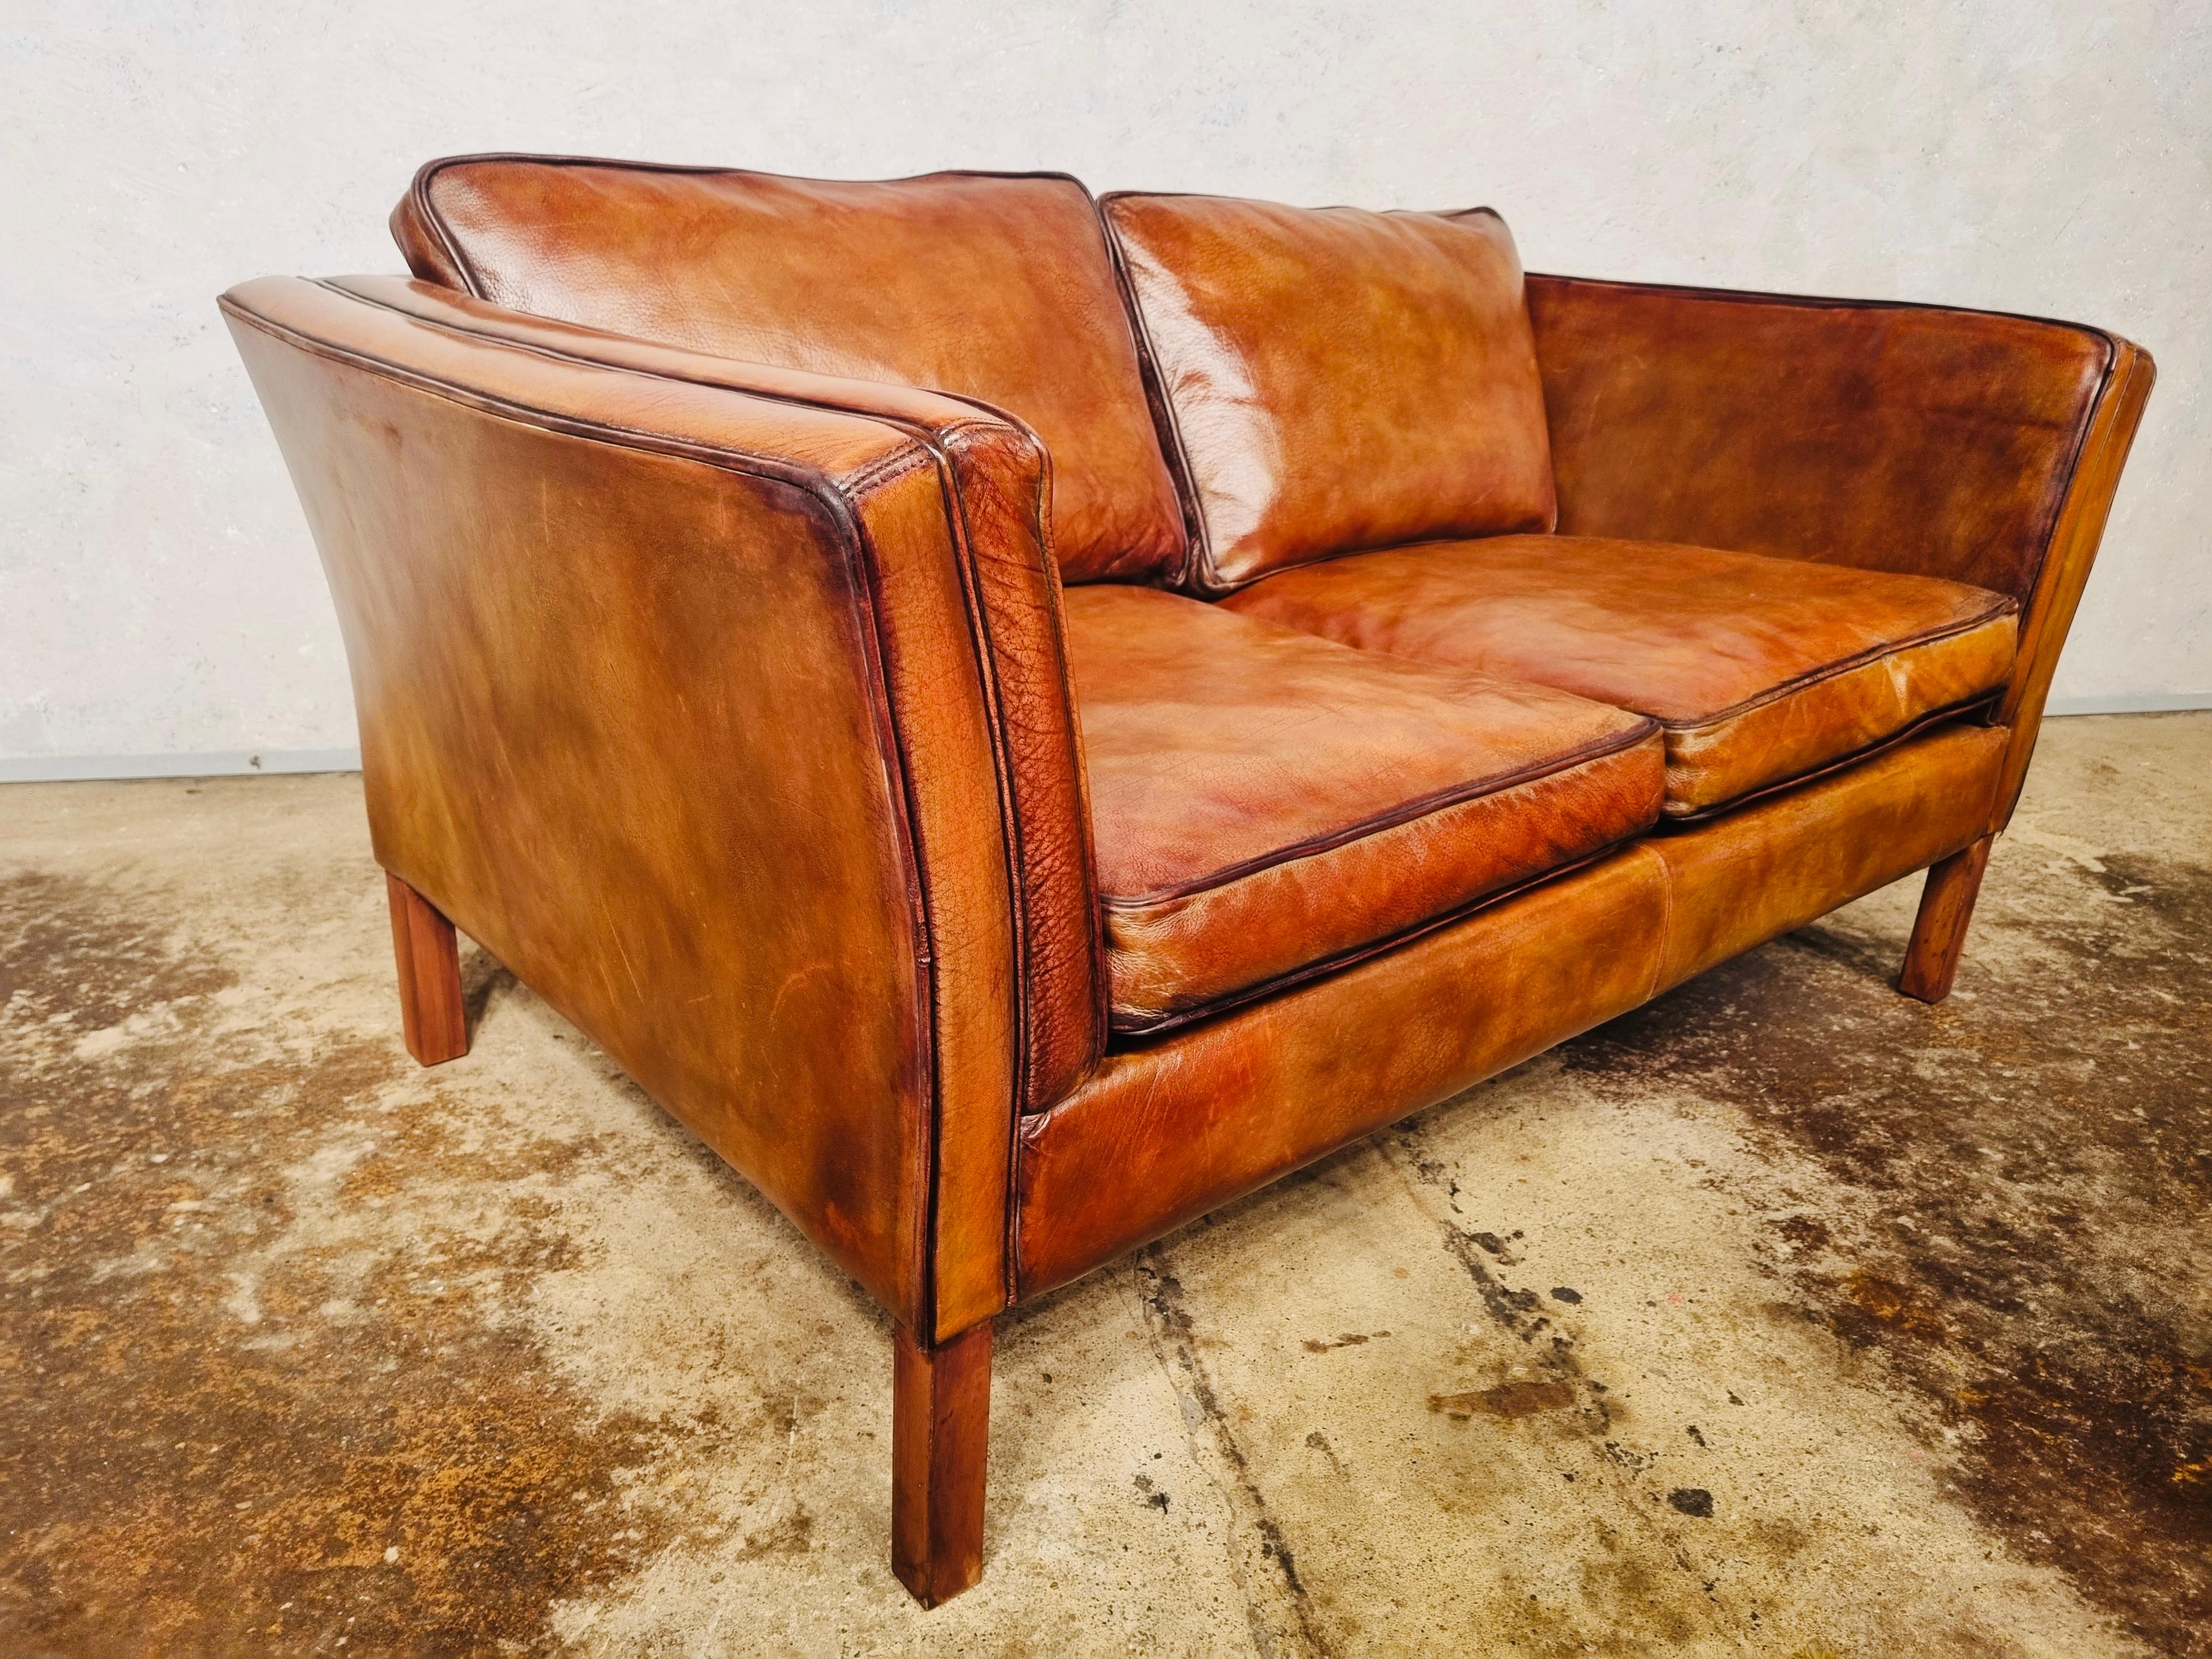 Neat Vintage Danish 70s Patinated Light Tan Two Seater Leather Sofa #679 For Sale 1